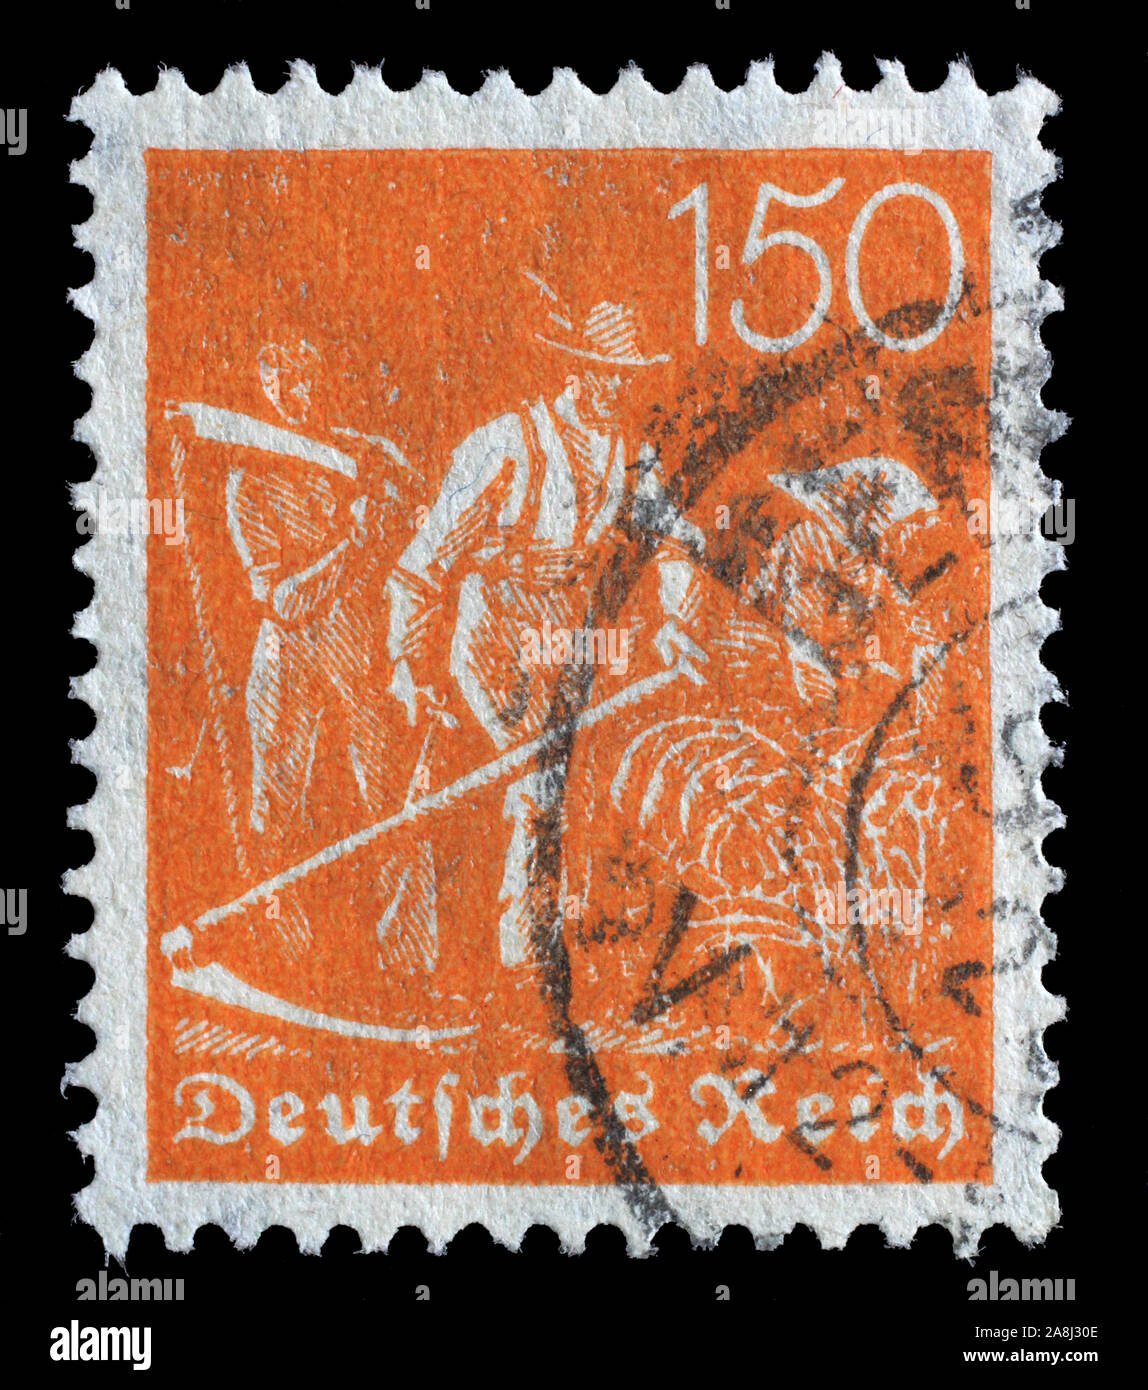 Stamp printed in Germany shows Reaper, Definitives series, circa 1921. Stock Photo